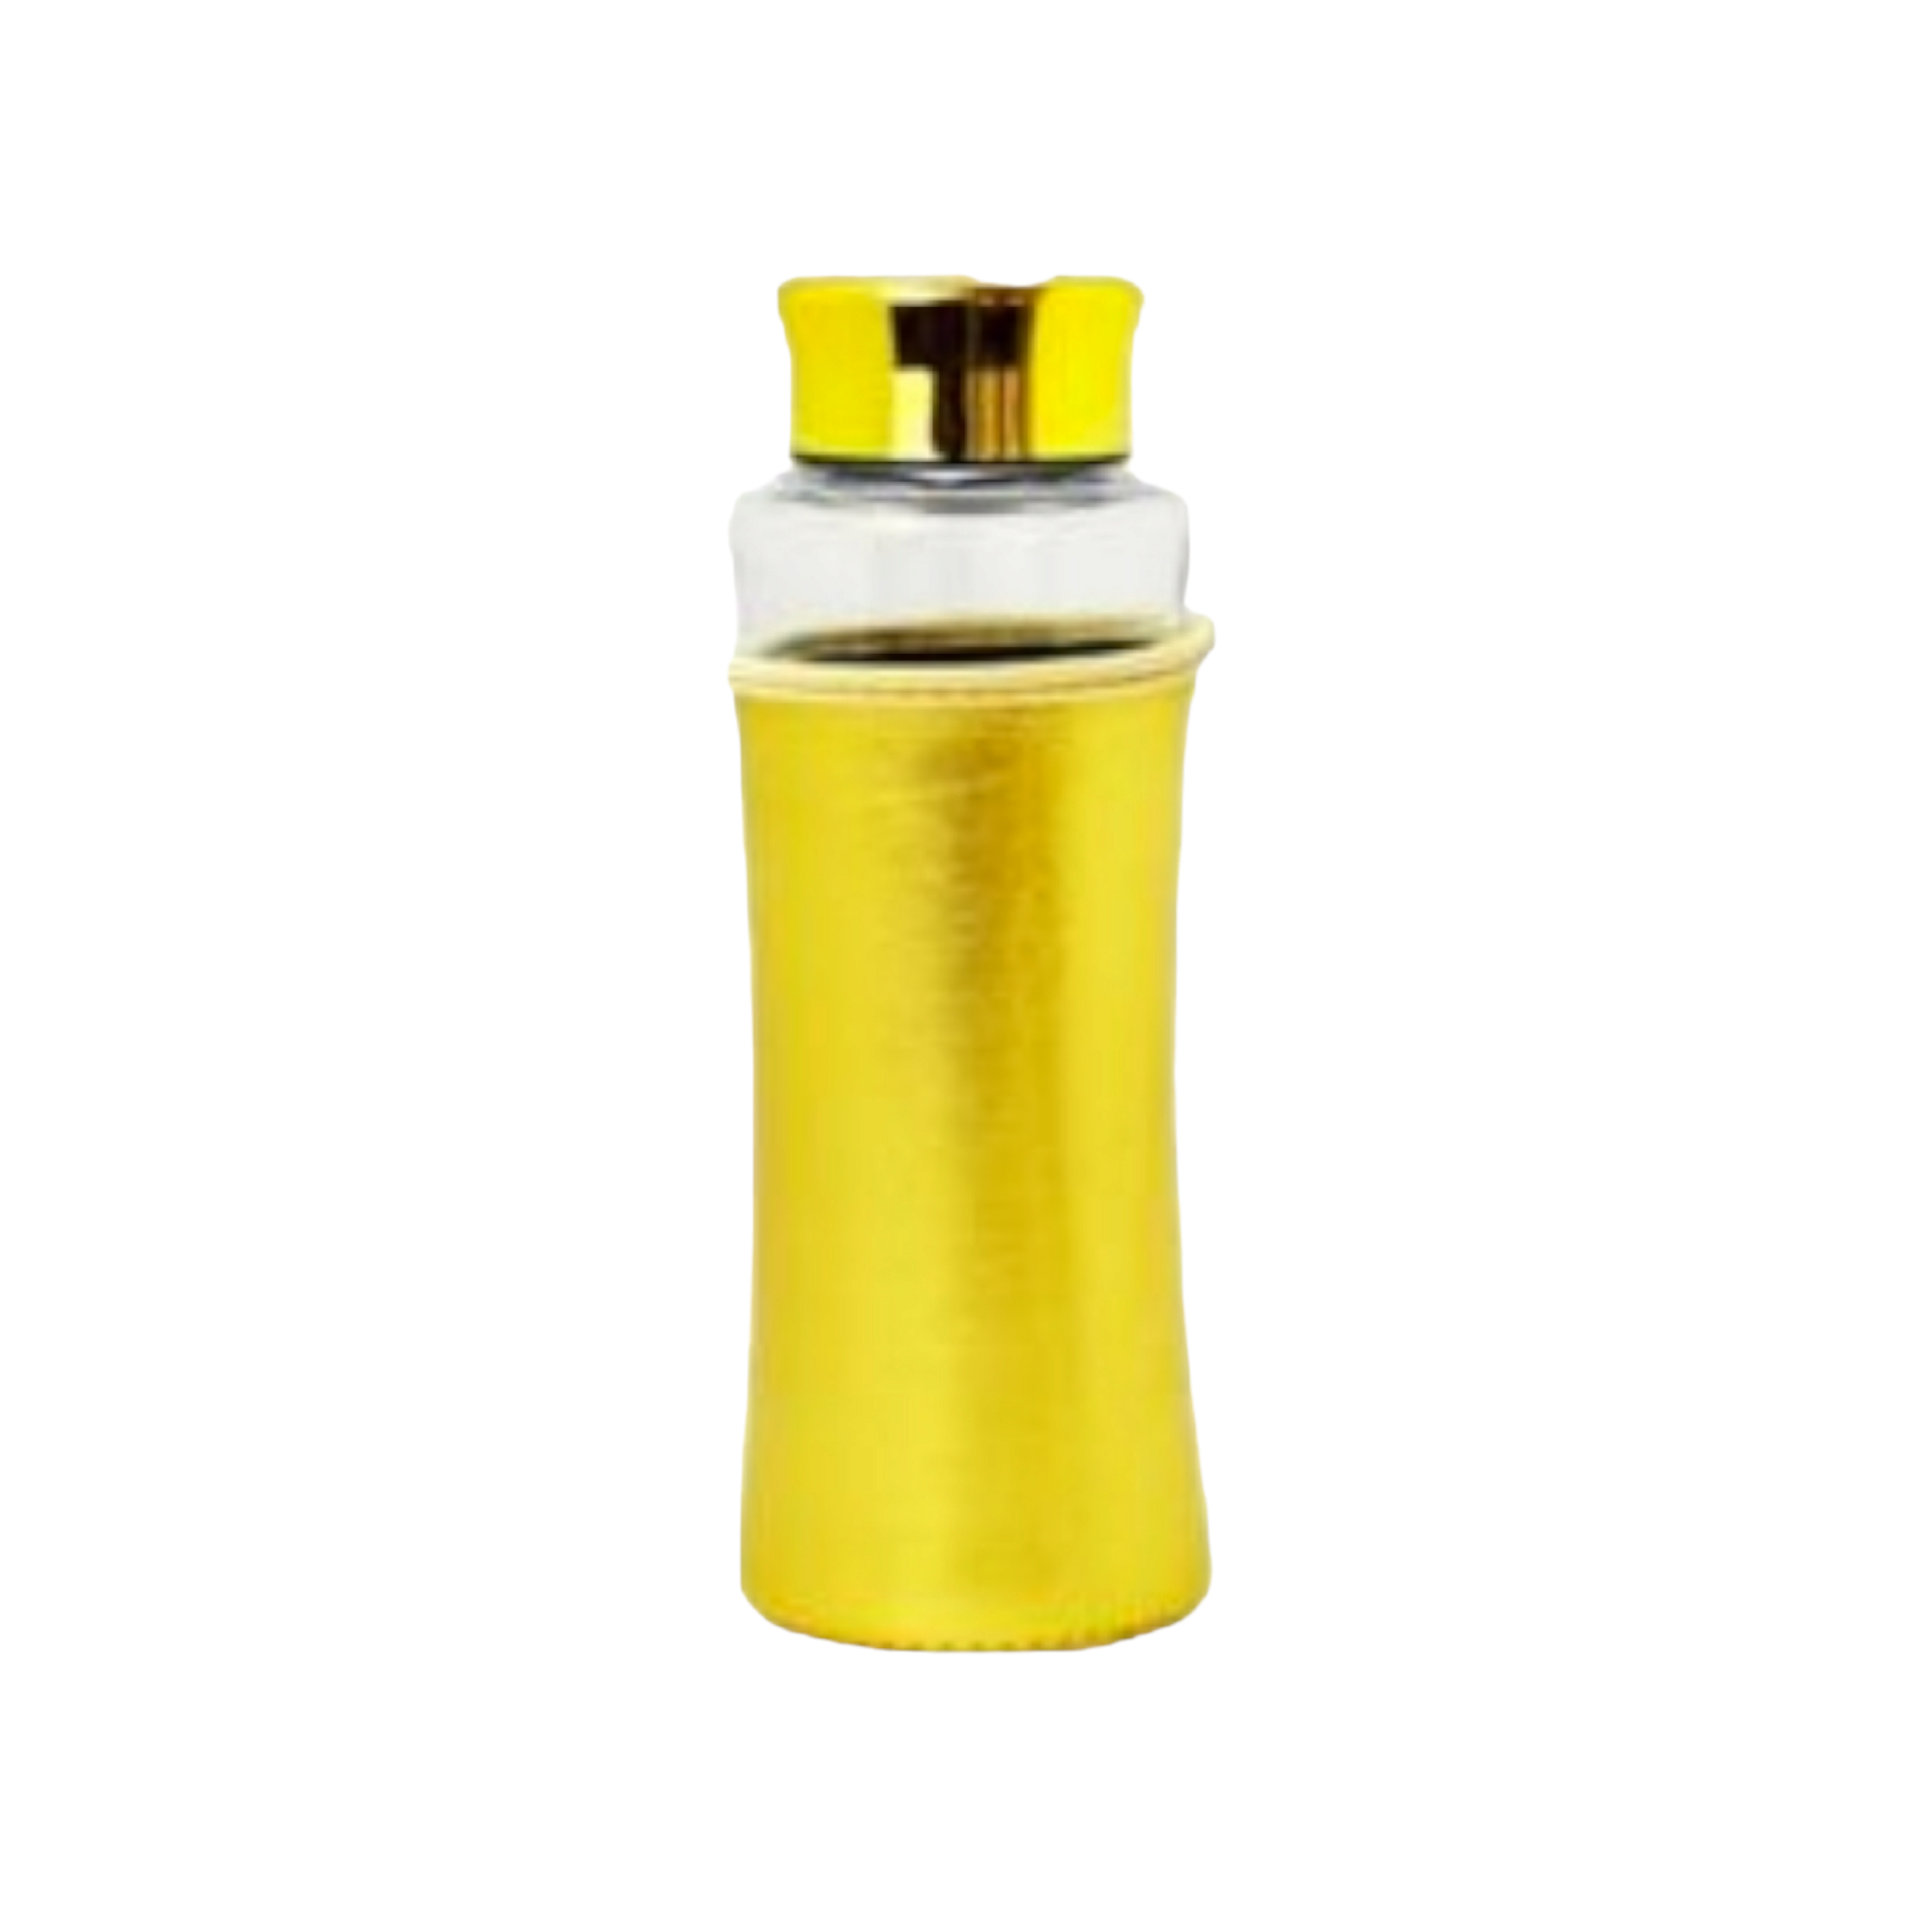 Regent Glass Drinking Bottle Flask 580ml with Colored Sleeve 26100